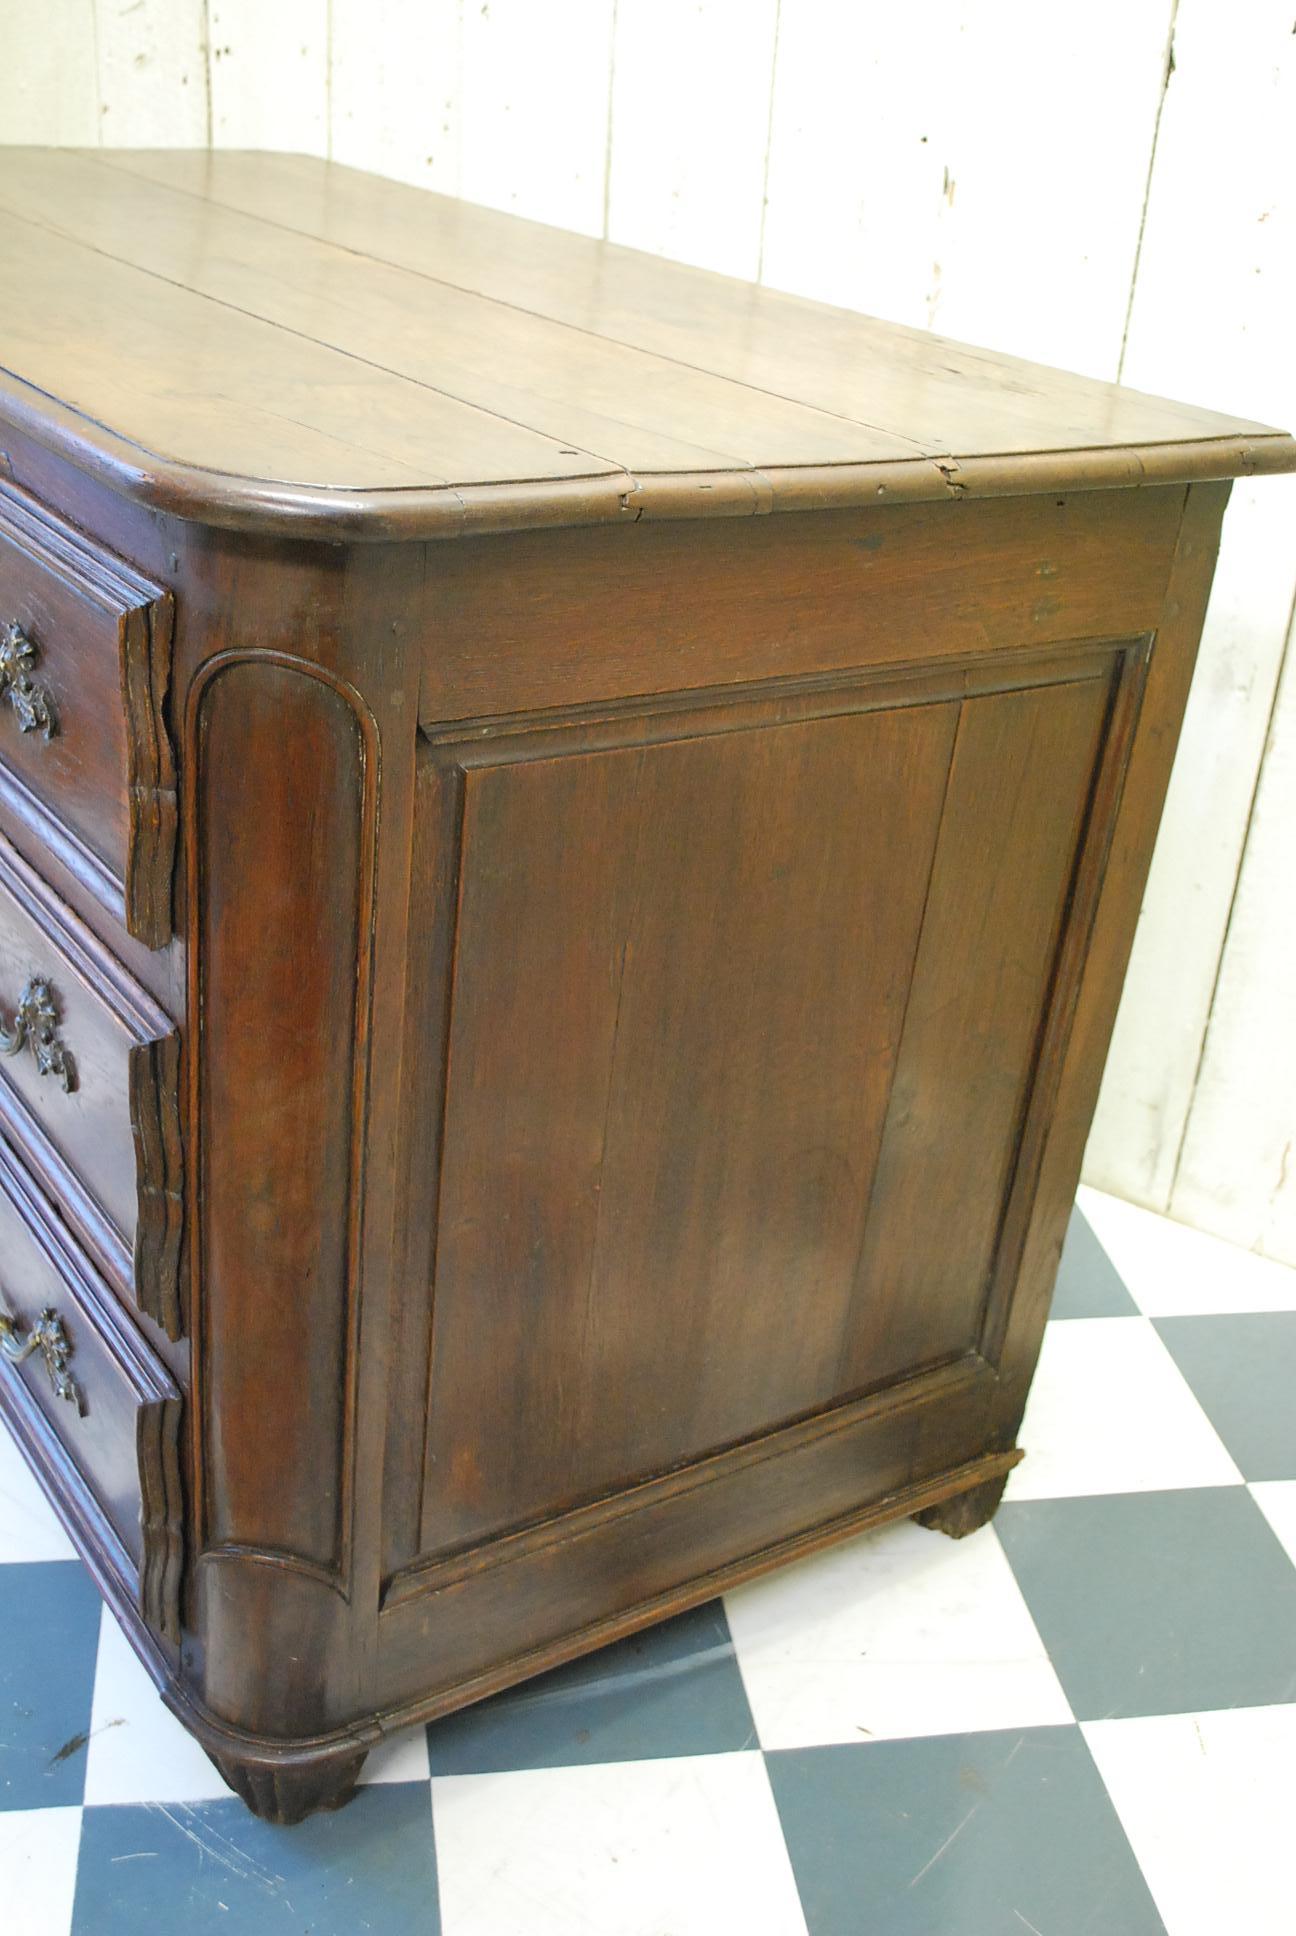 Antique French 18th Century Provincial Oak Commode / Chest of Drawers In Good Condition For Sale In Winchcombe, Gloucesteshire